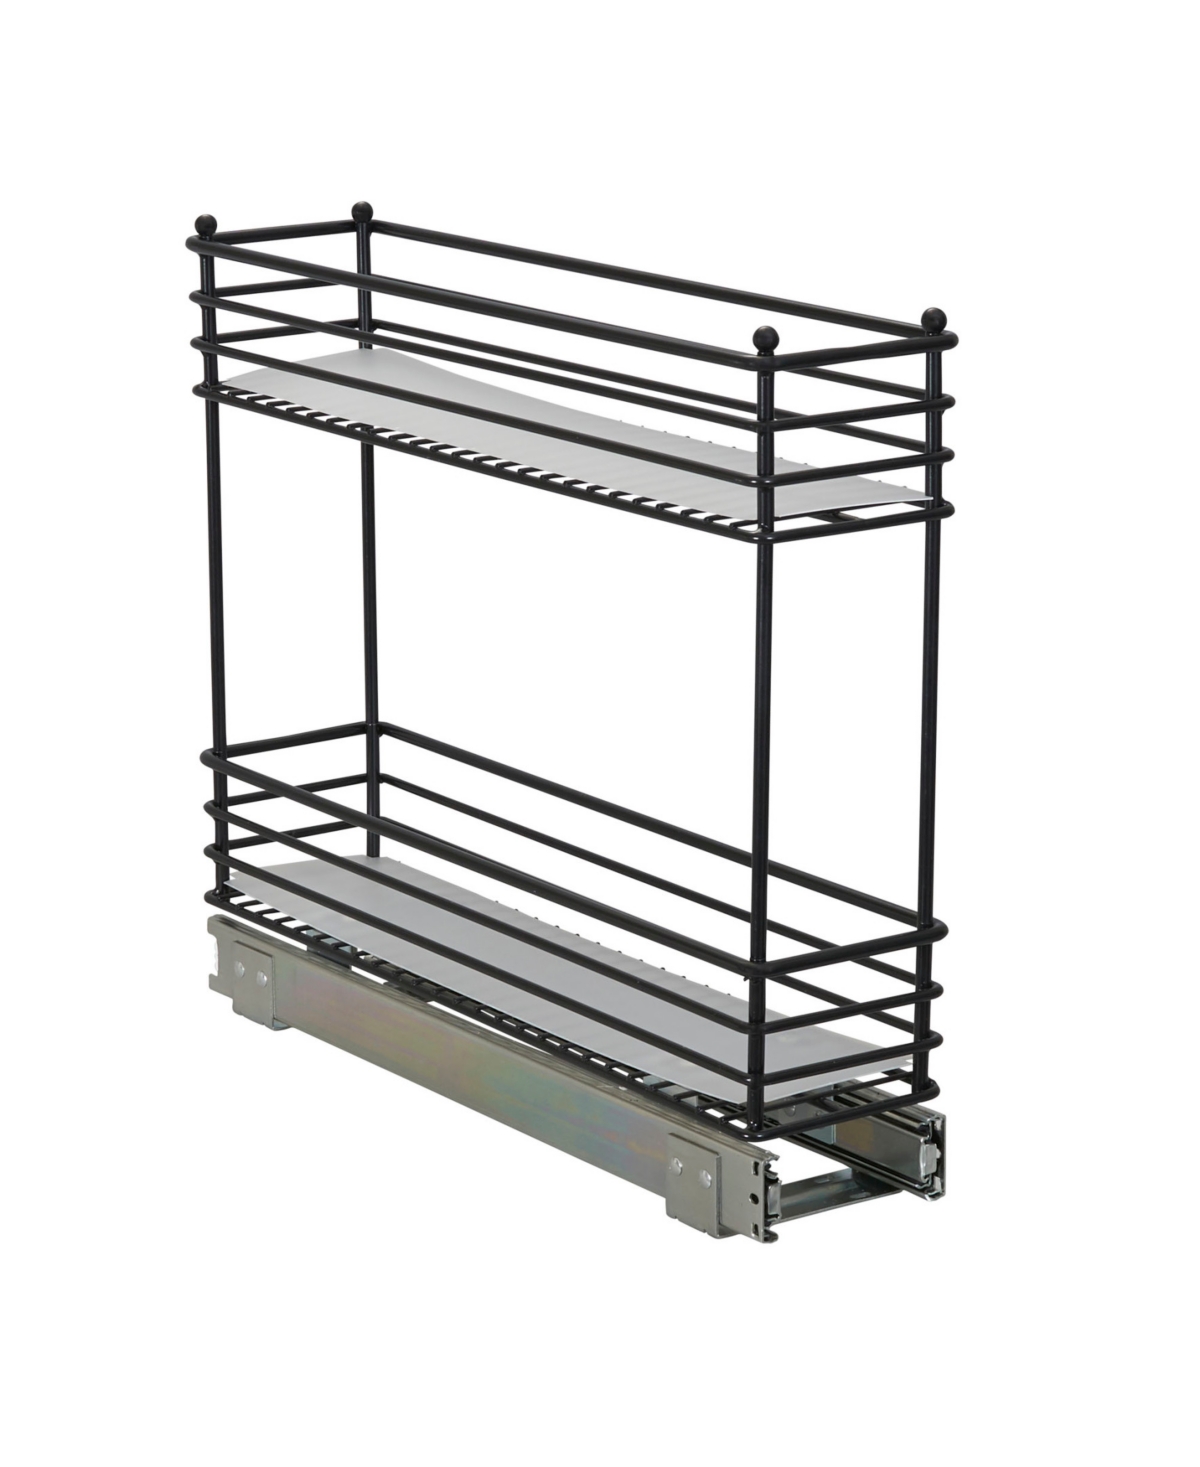 Glidez Multipurpose Paint-Finished Steel Pull-Out/Slide-Out Storage Organizer with Plastic Liners for Under Cabinet 2-Tier Design